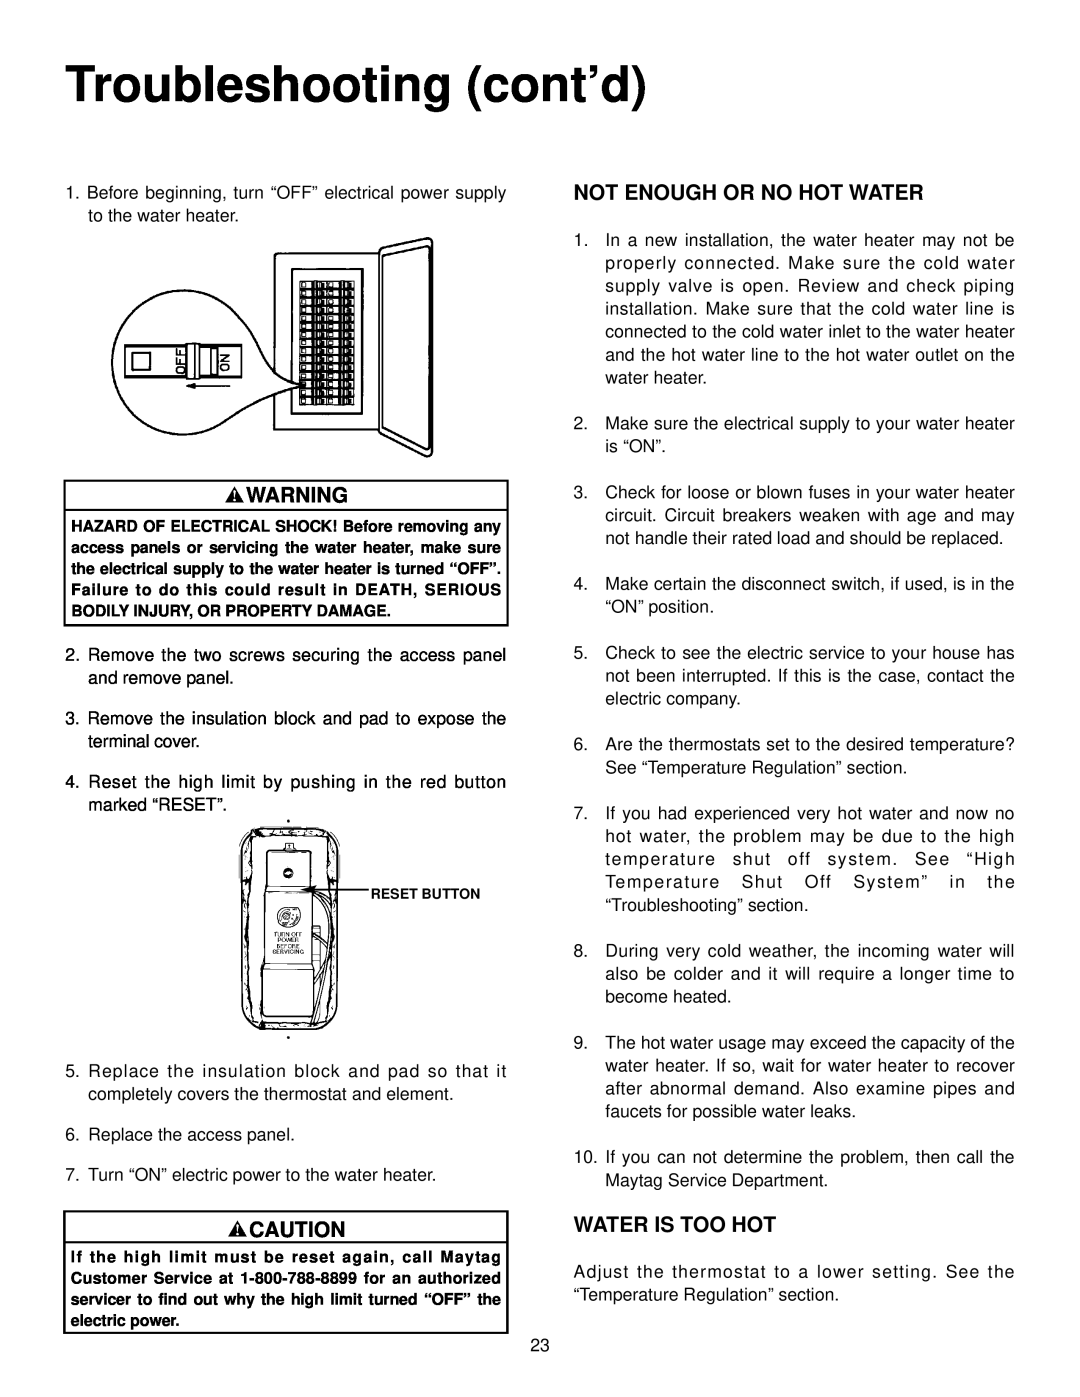 Maytag HR682SJRT, HR652SJRT, HR666DJRT, HR652DJRT manual Troubleshooting cont’d, Not Enough Or No Hot Water, Water Is Too Hot 